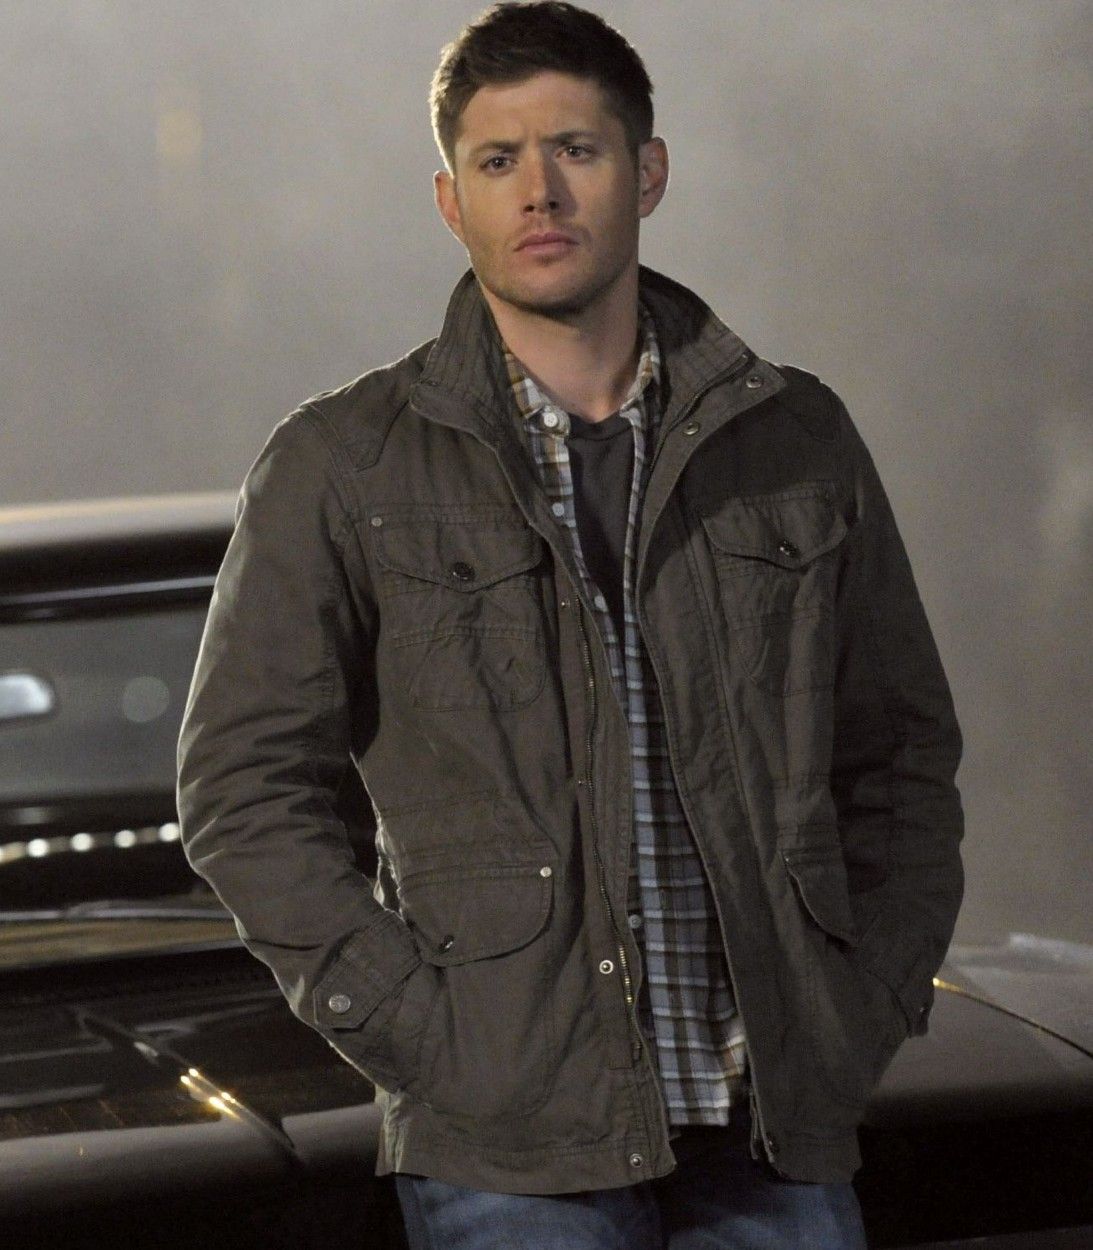 Jensen Ackles as Dean Winchester with his Impala in Supernatural